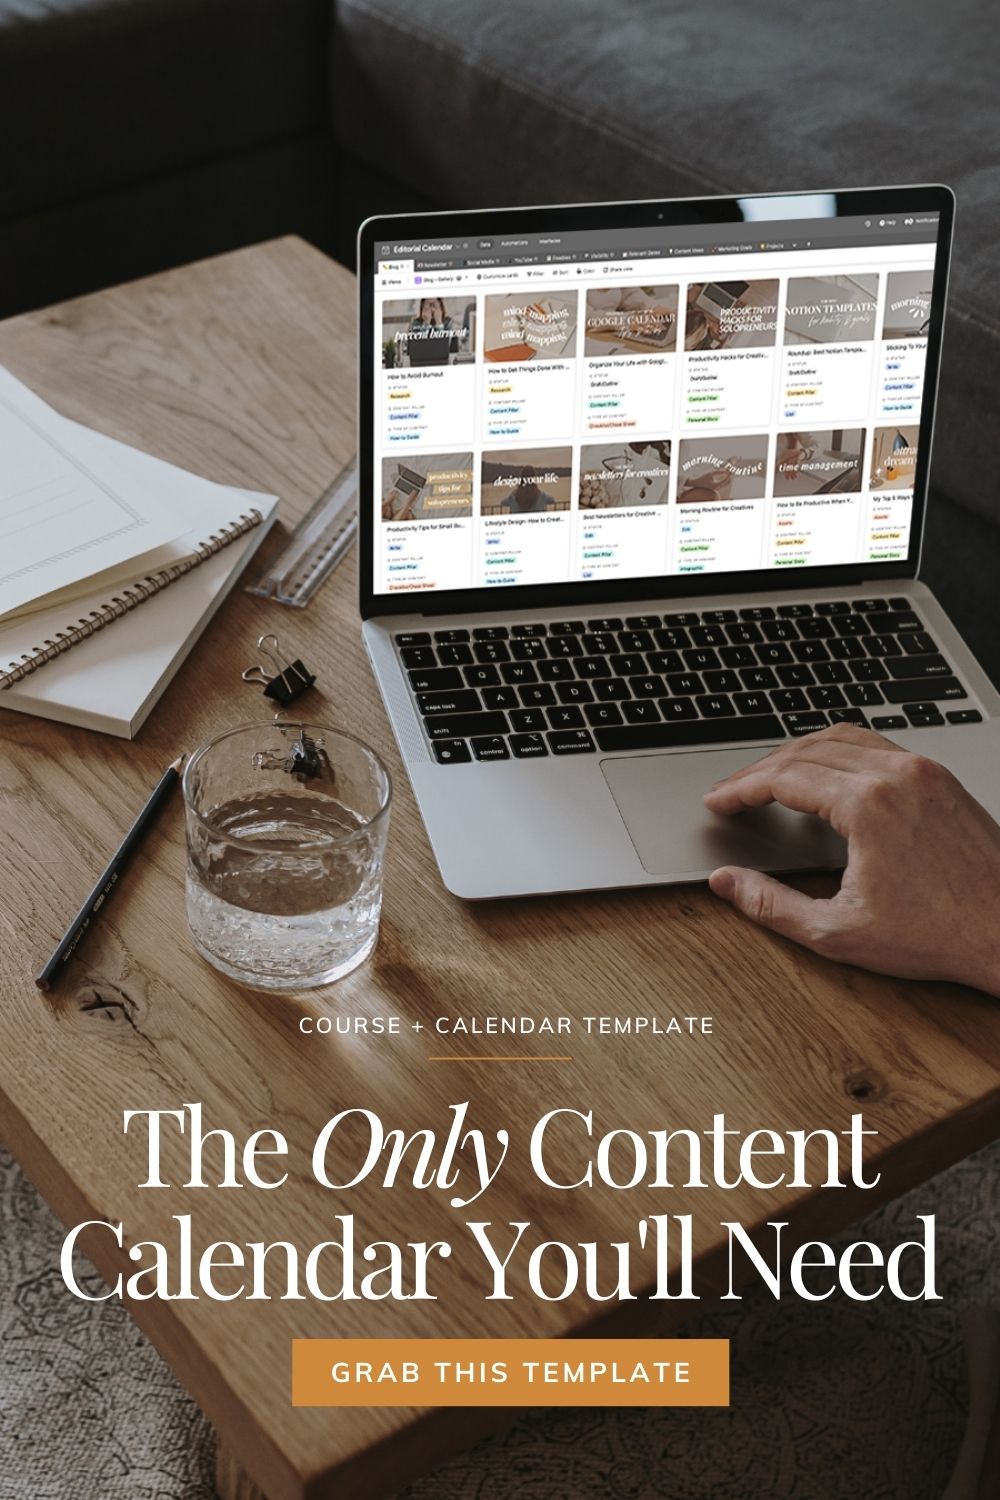 Streamline your content creation process with a content calendar that integrates your content strategy, marketing goals and projects all into one place.

